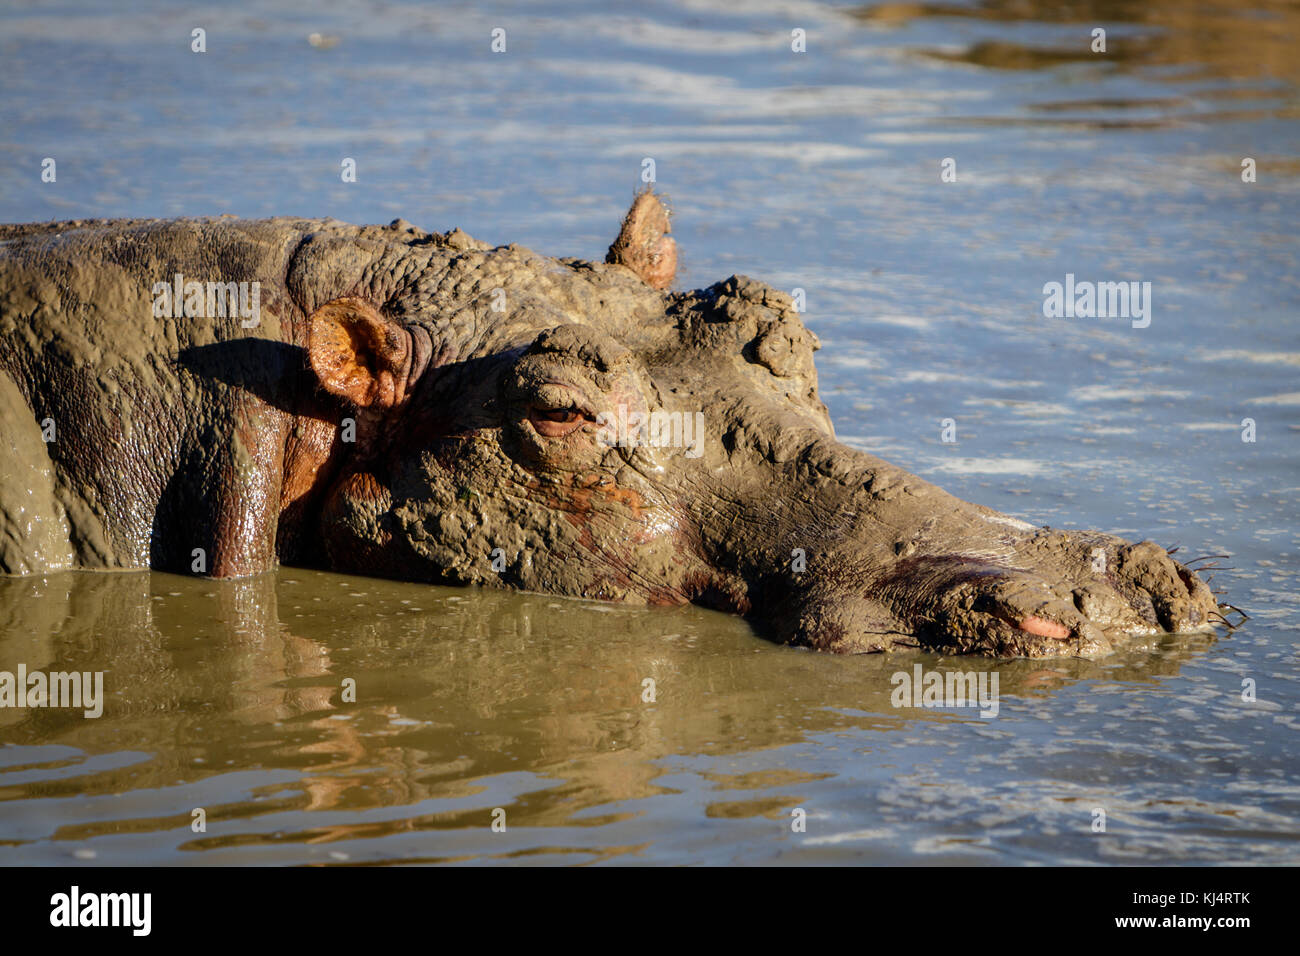 A lazy hippo taking a mud bath and enjoying the sunset in Murchison Stock Photo